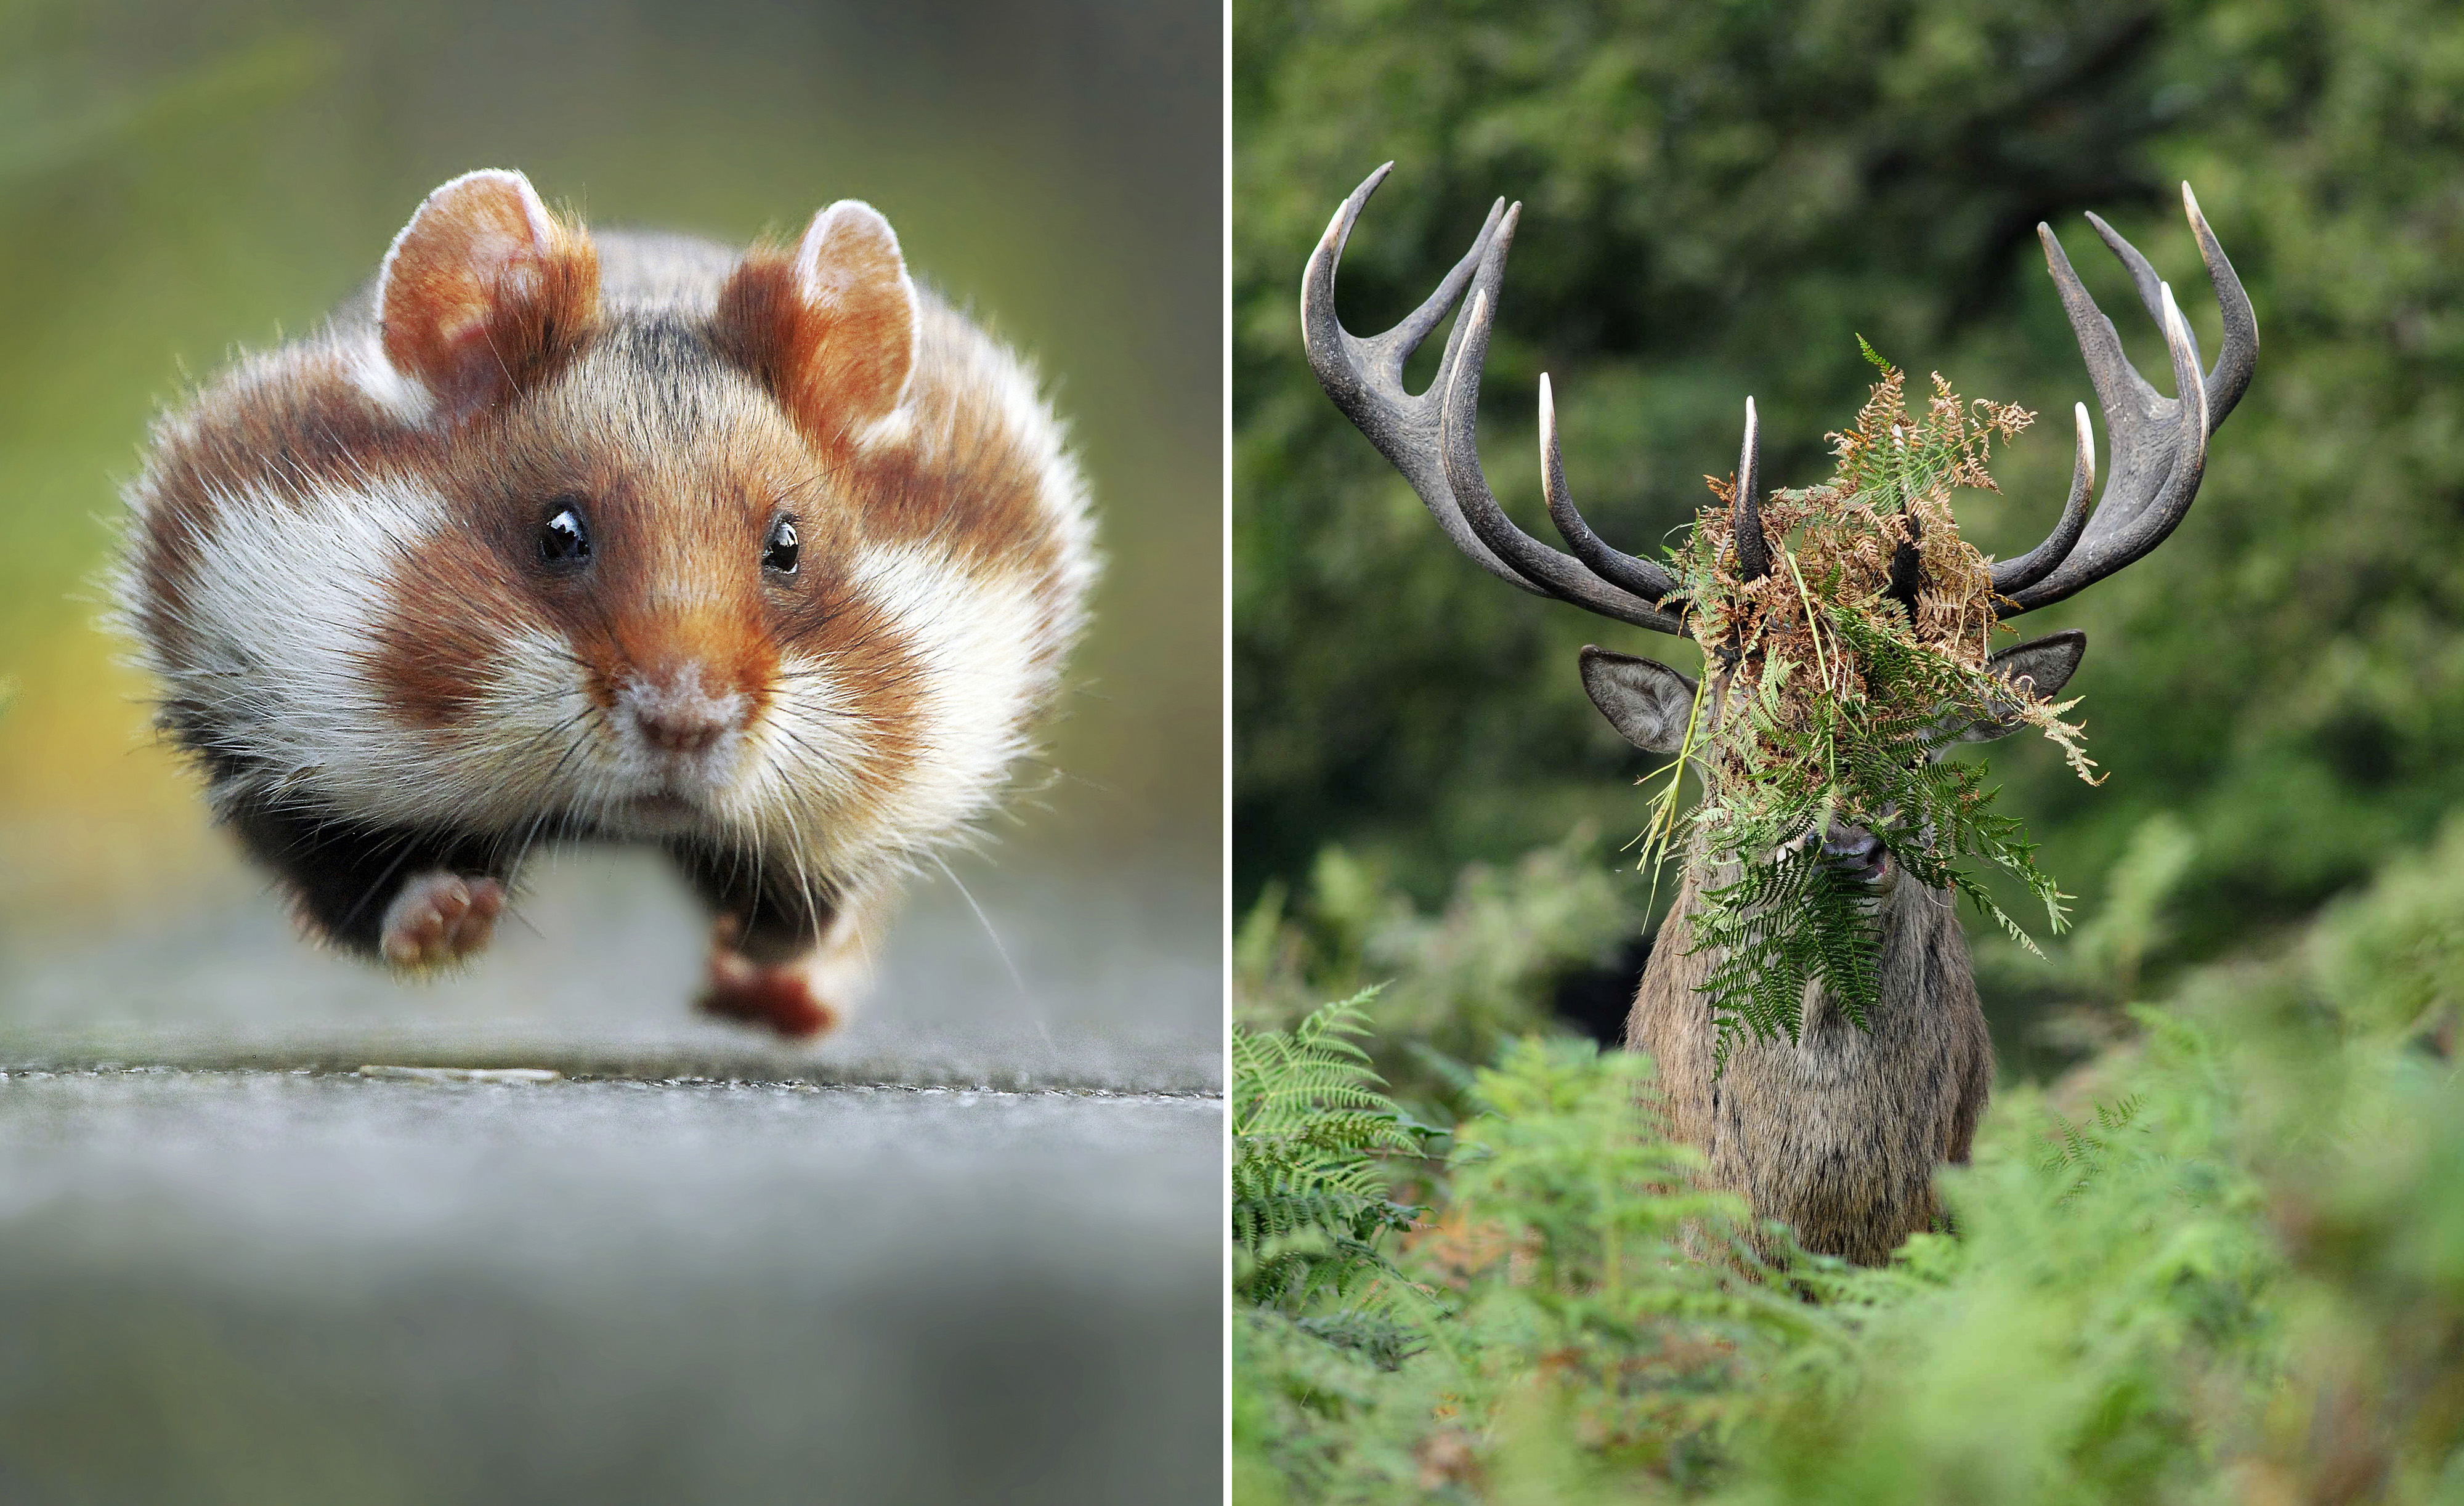 Hilarious animals - Hilarious winners of The Comedy Wildlife